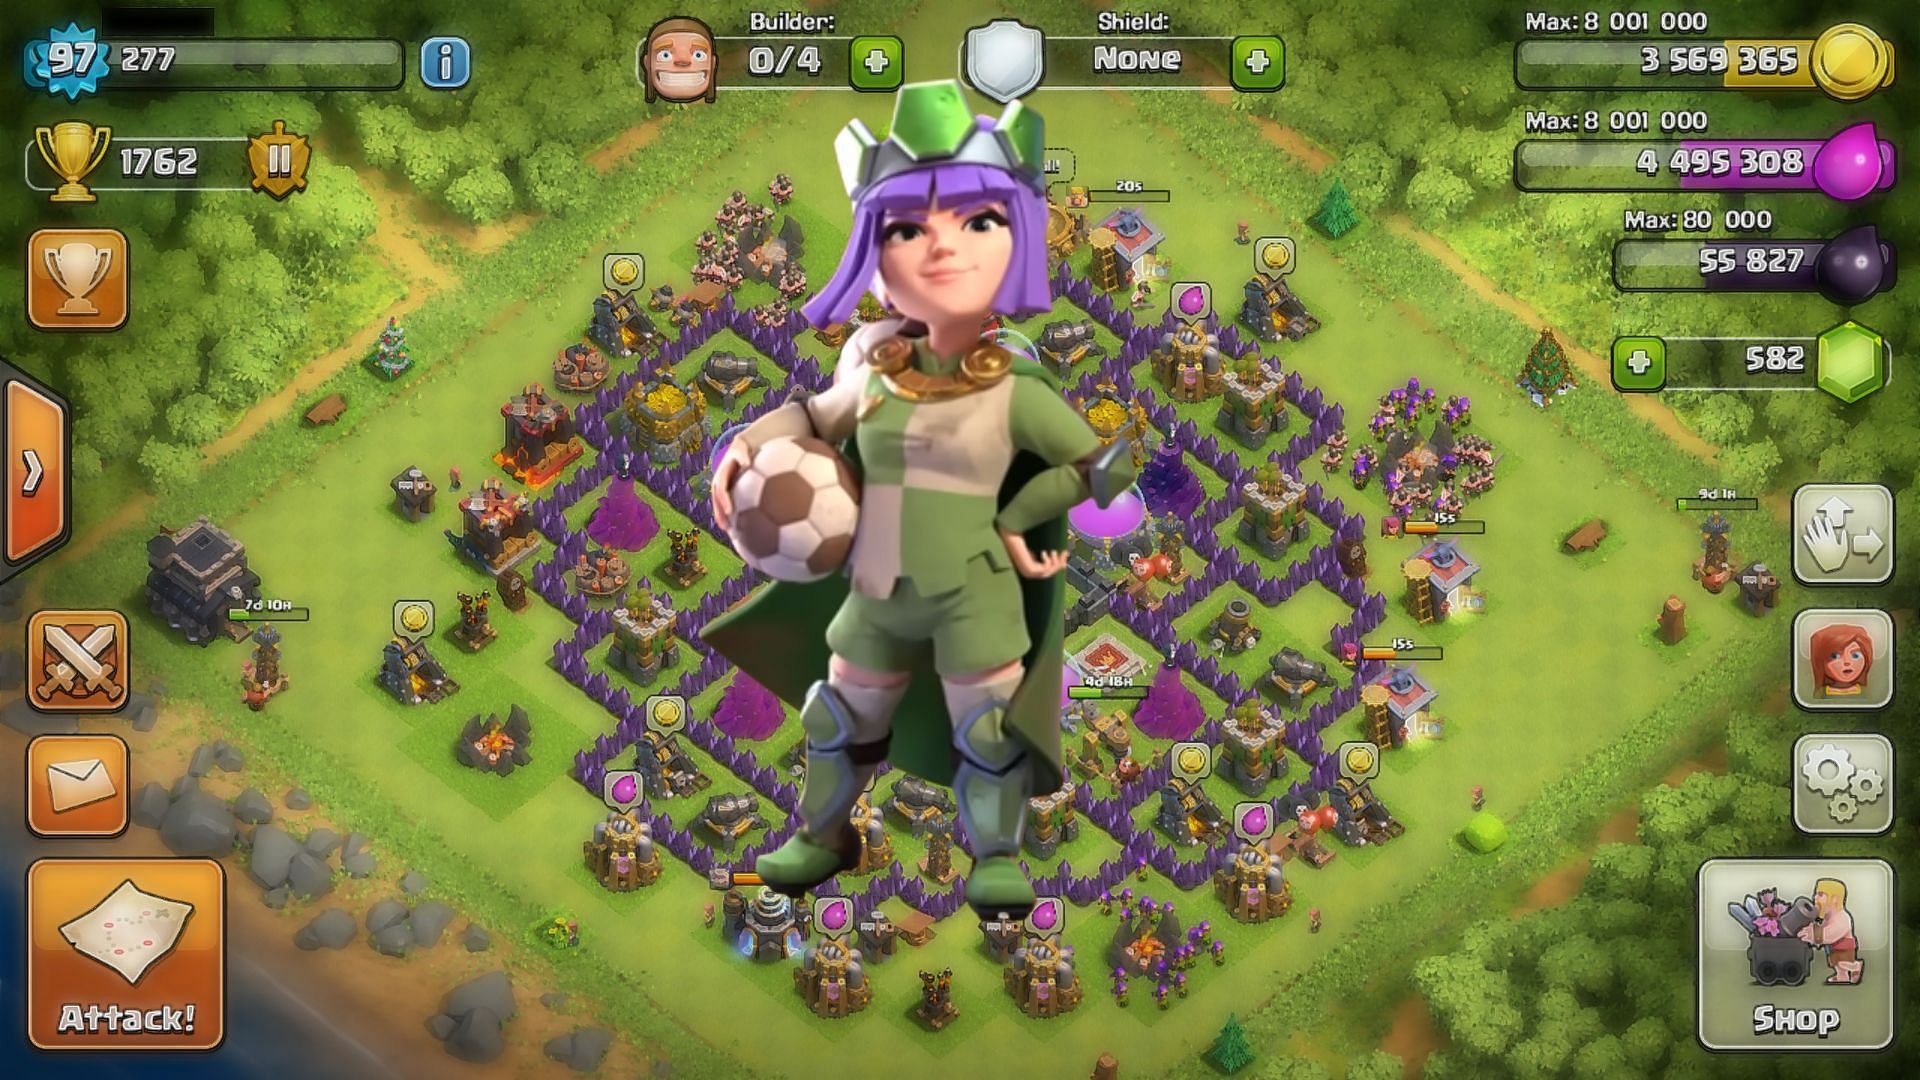 Archer Queen Football skin (Image via Supercell)